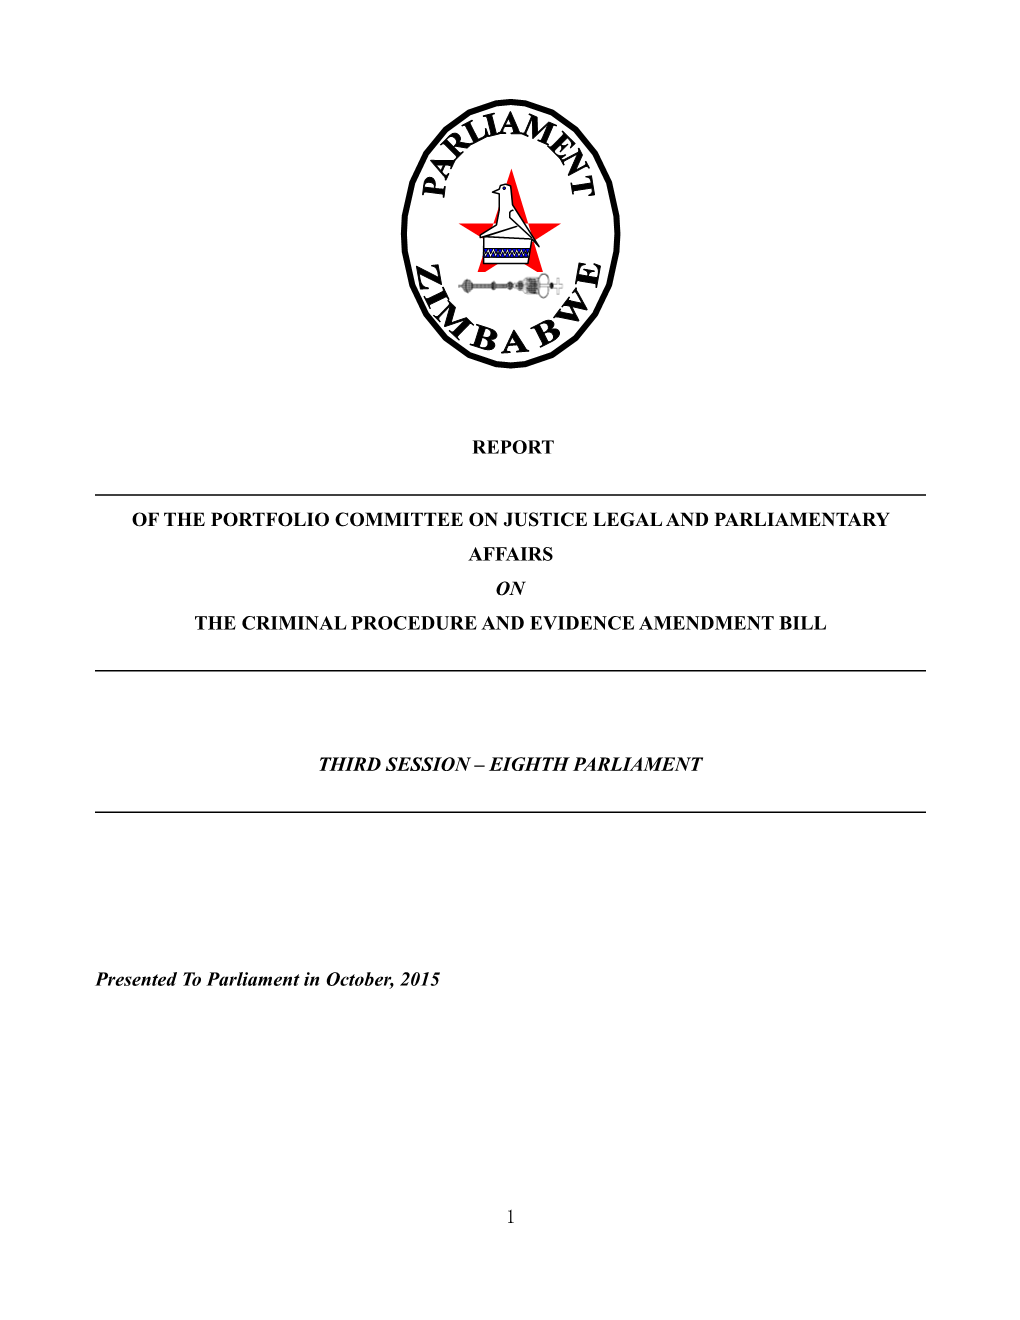 Of the Portfolio Committee on Justice Legal and Parliamentary Affairs